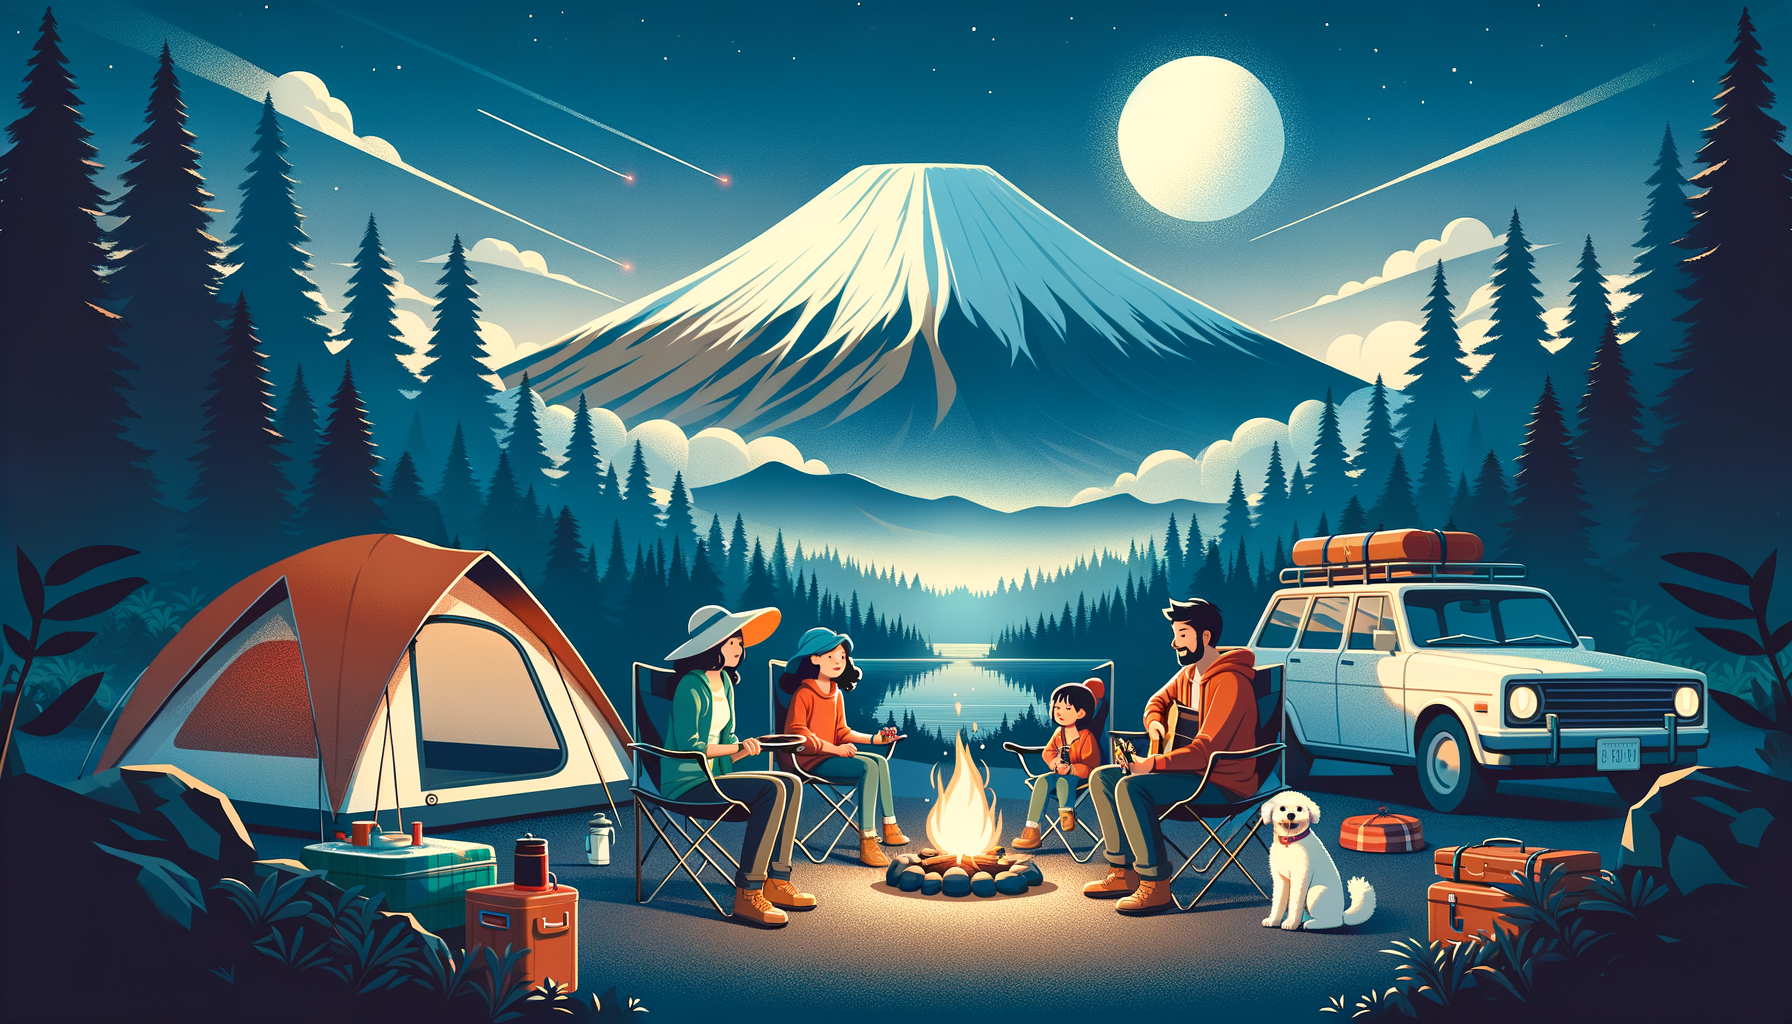 Design a mobile wallpaper for outdoor camping. In the distance, you can see Mount Fuji. In the close-up, a car, a tent, and a family of three are sitting around camping chairs. Next to them is a cute little dog, with a campfire burning. In the distance, there is a round moon in the sky